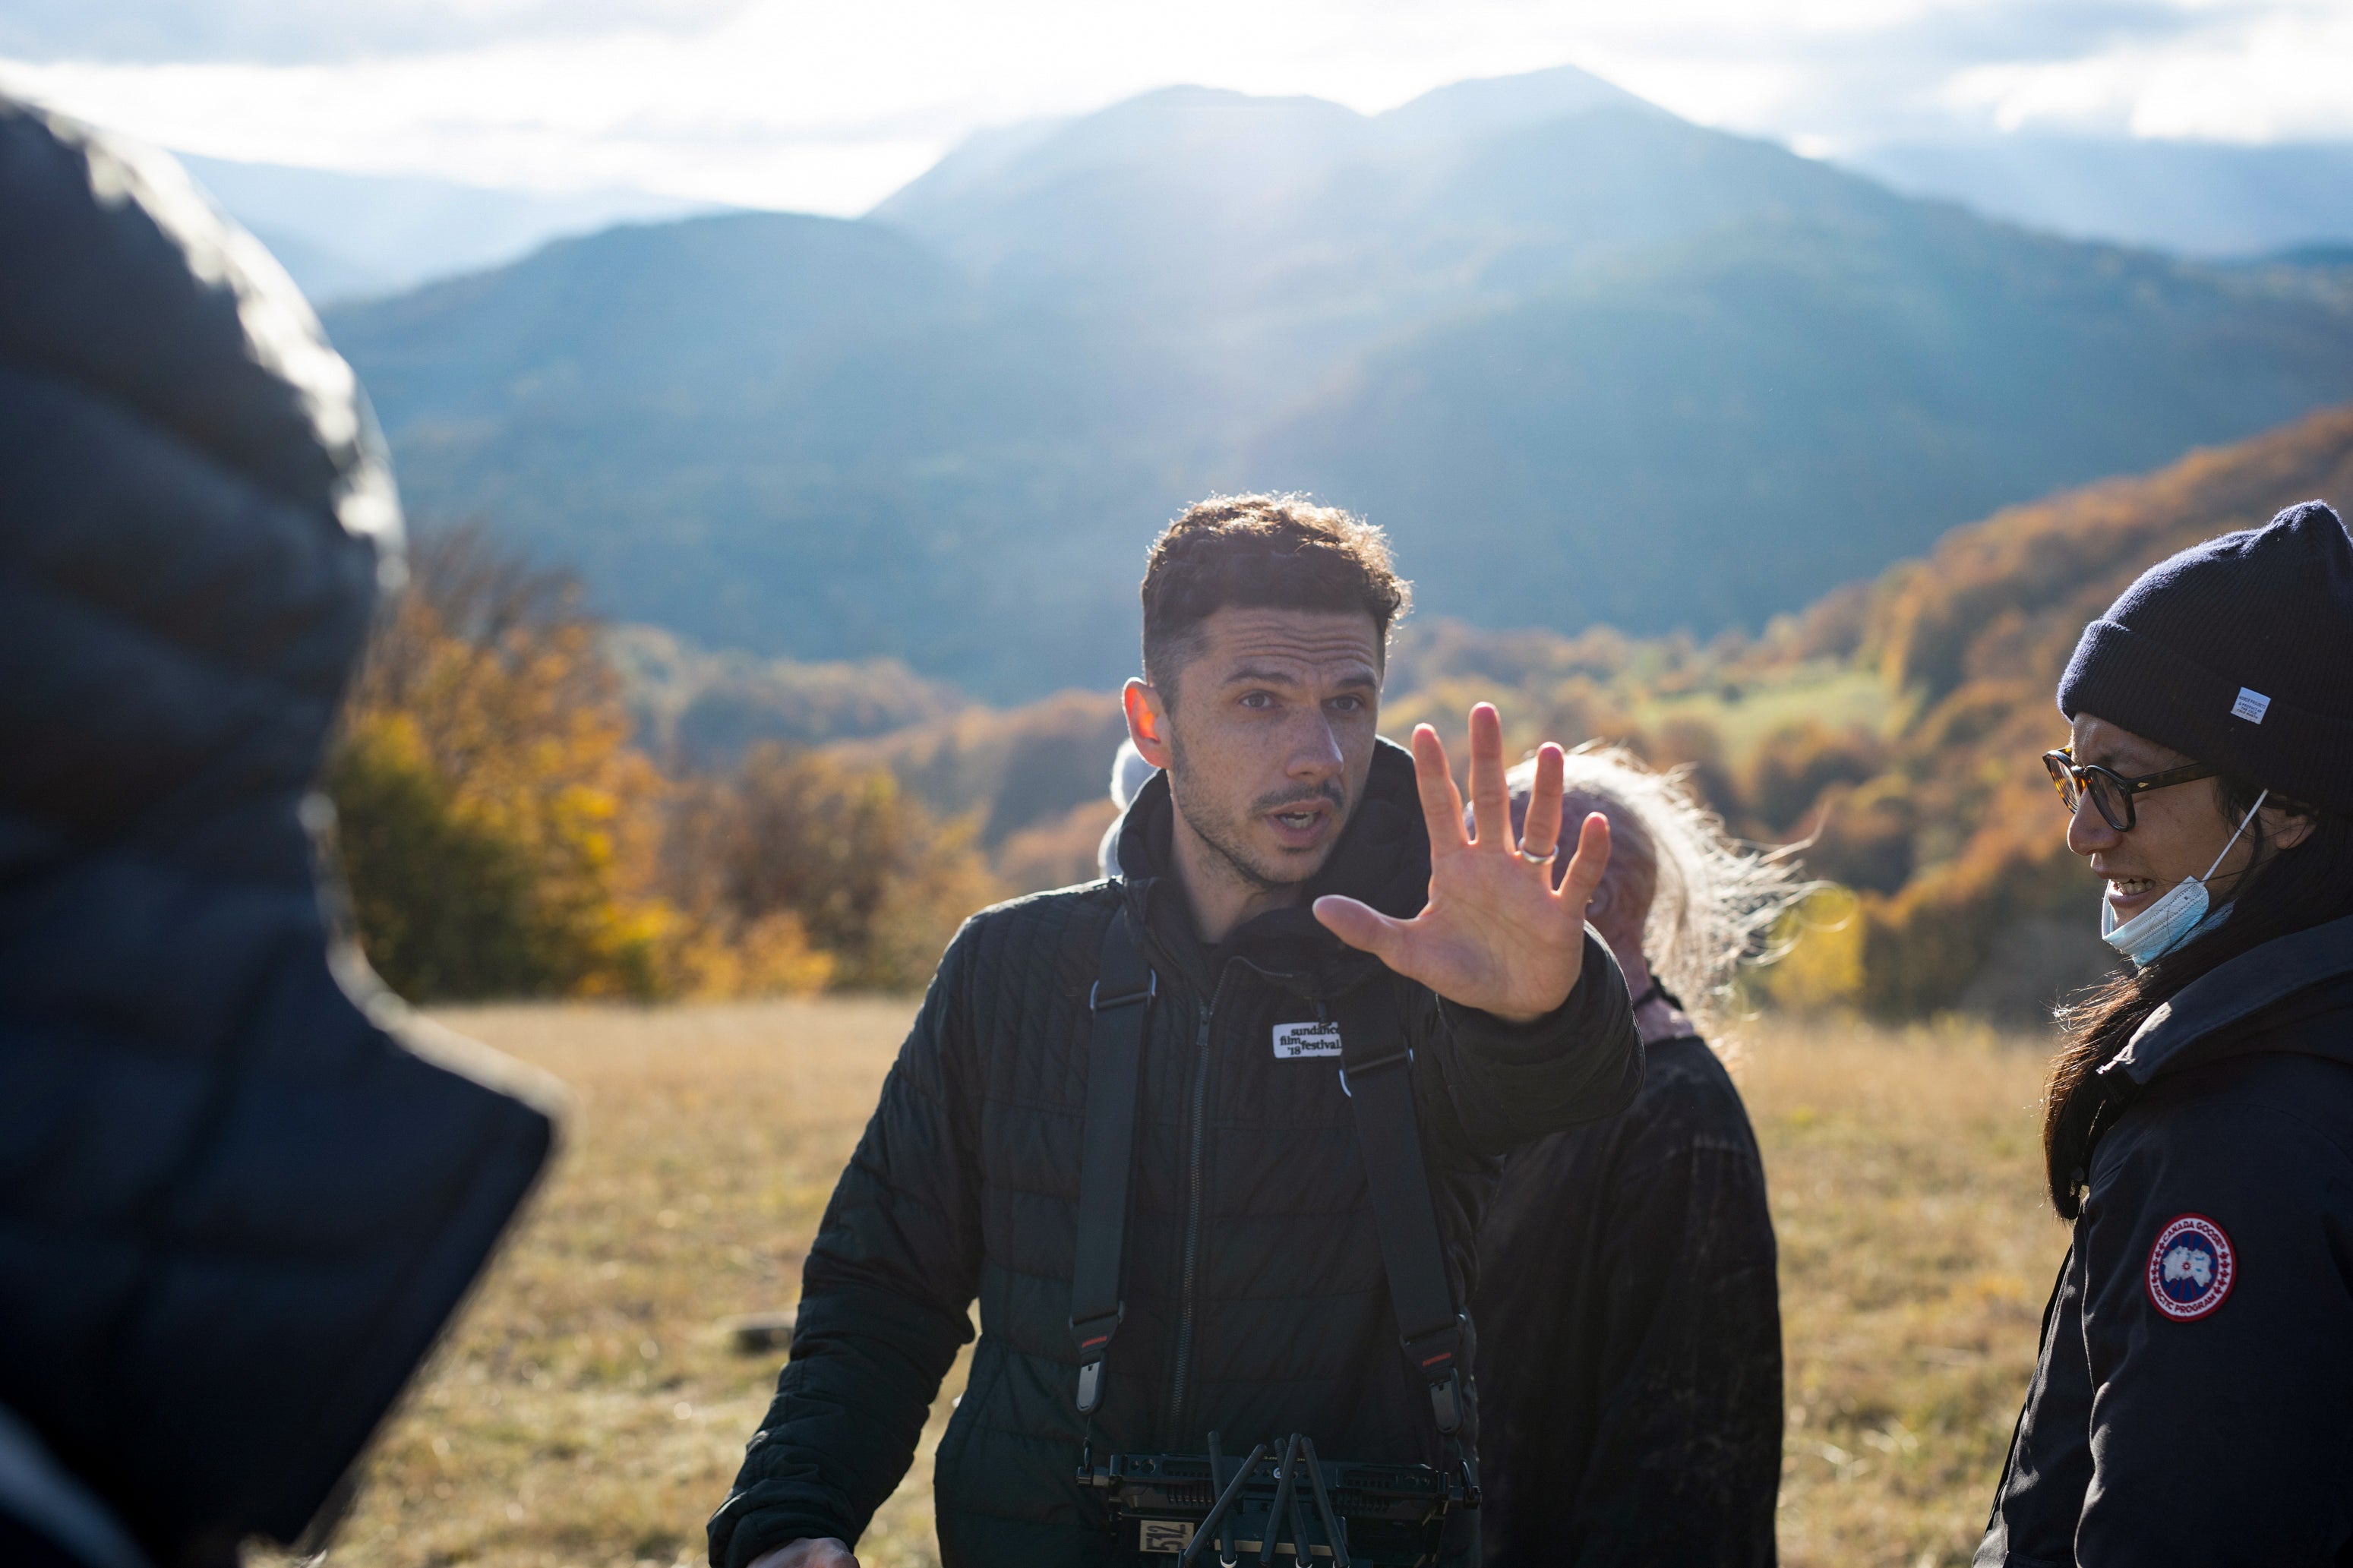 Director Goran Stolevski on the set of You Won't Be Alone. (Photo: Branko Starcevic/Focus Features)